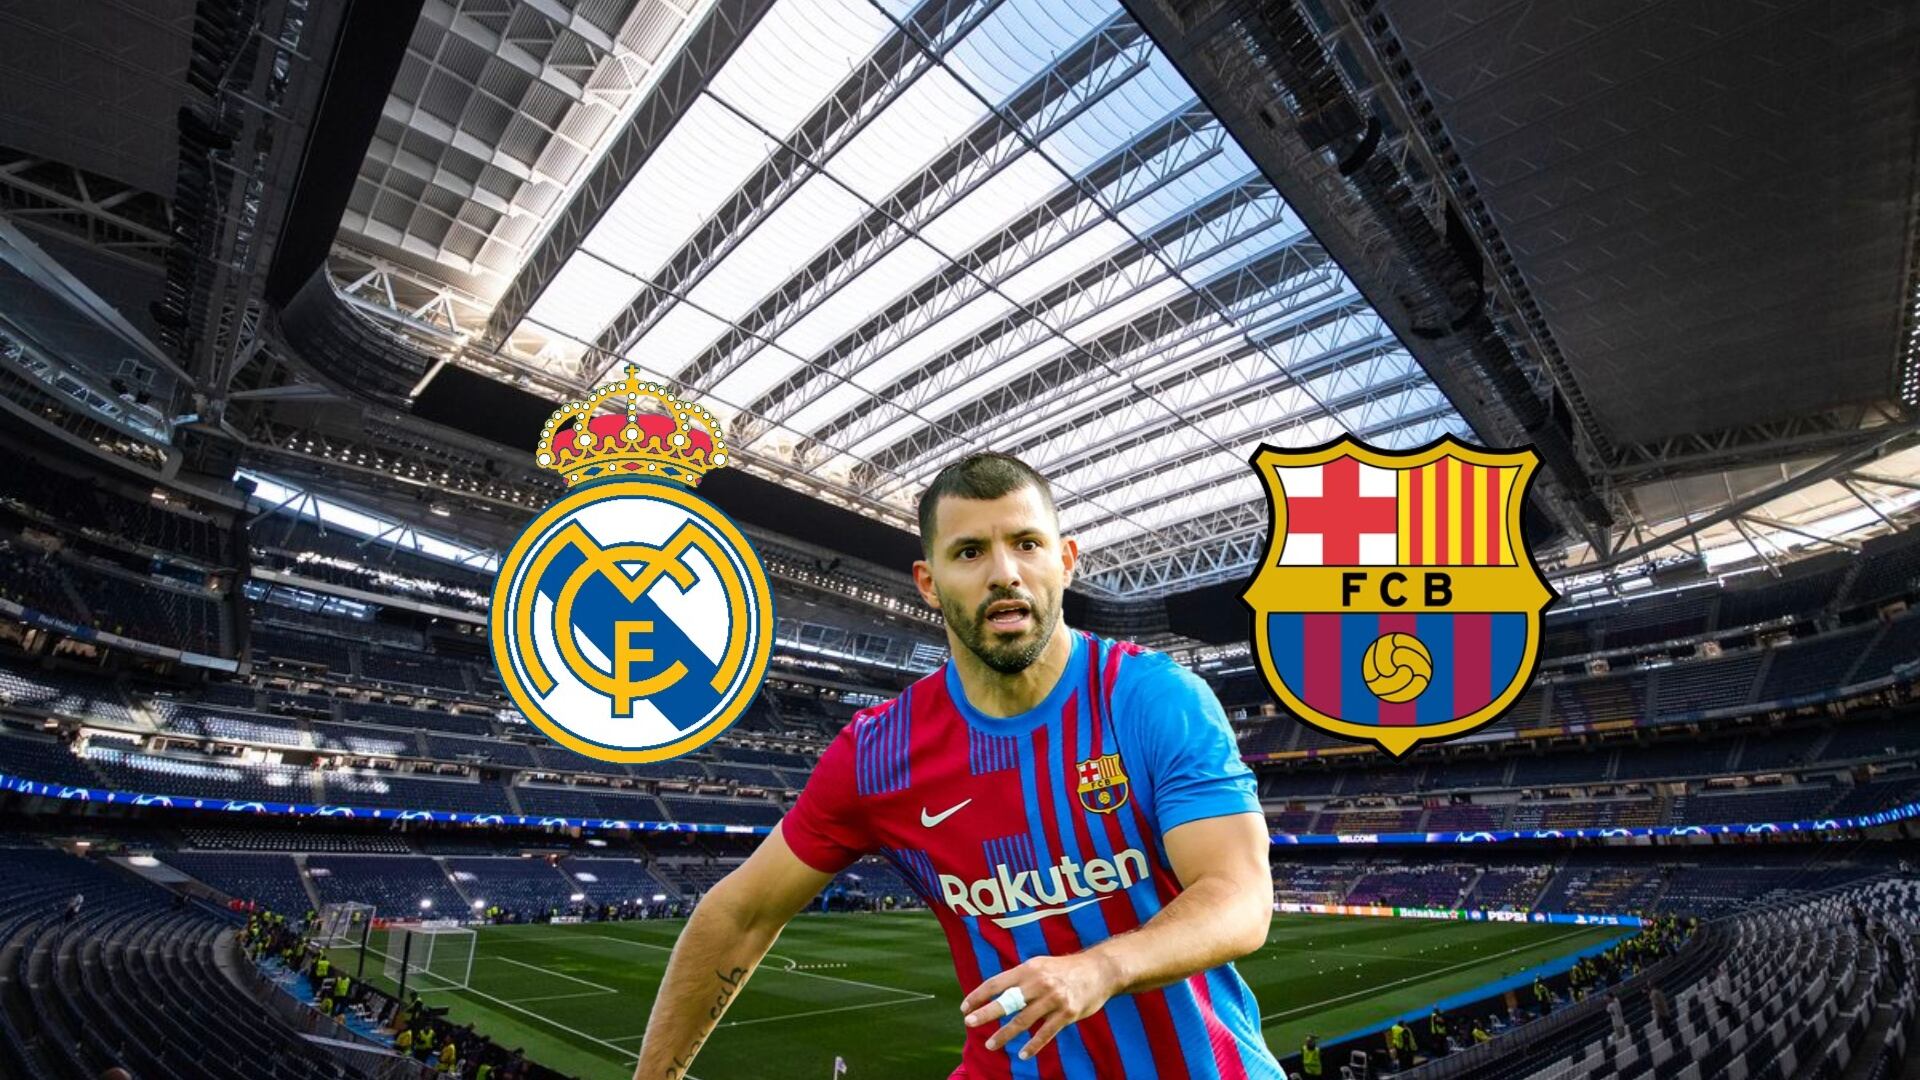 He could earn more than $20k, the risky bet from Kun Aguero for El Clasico